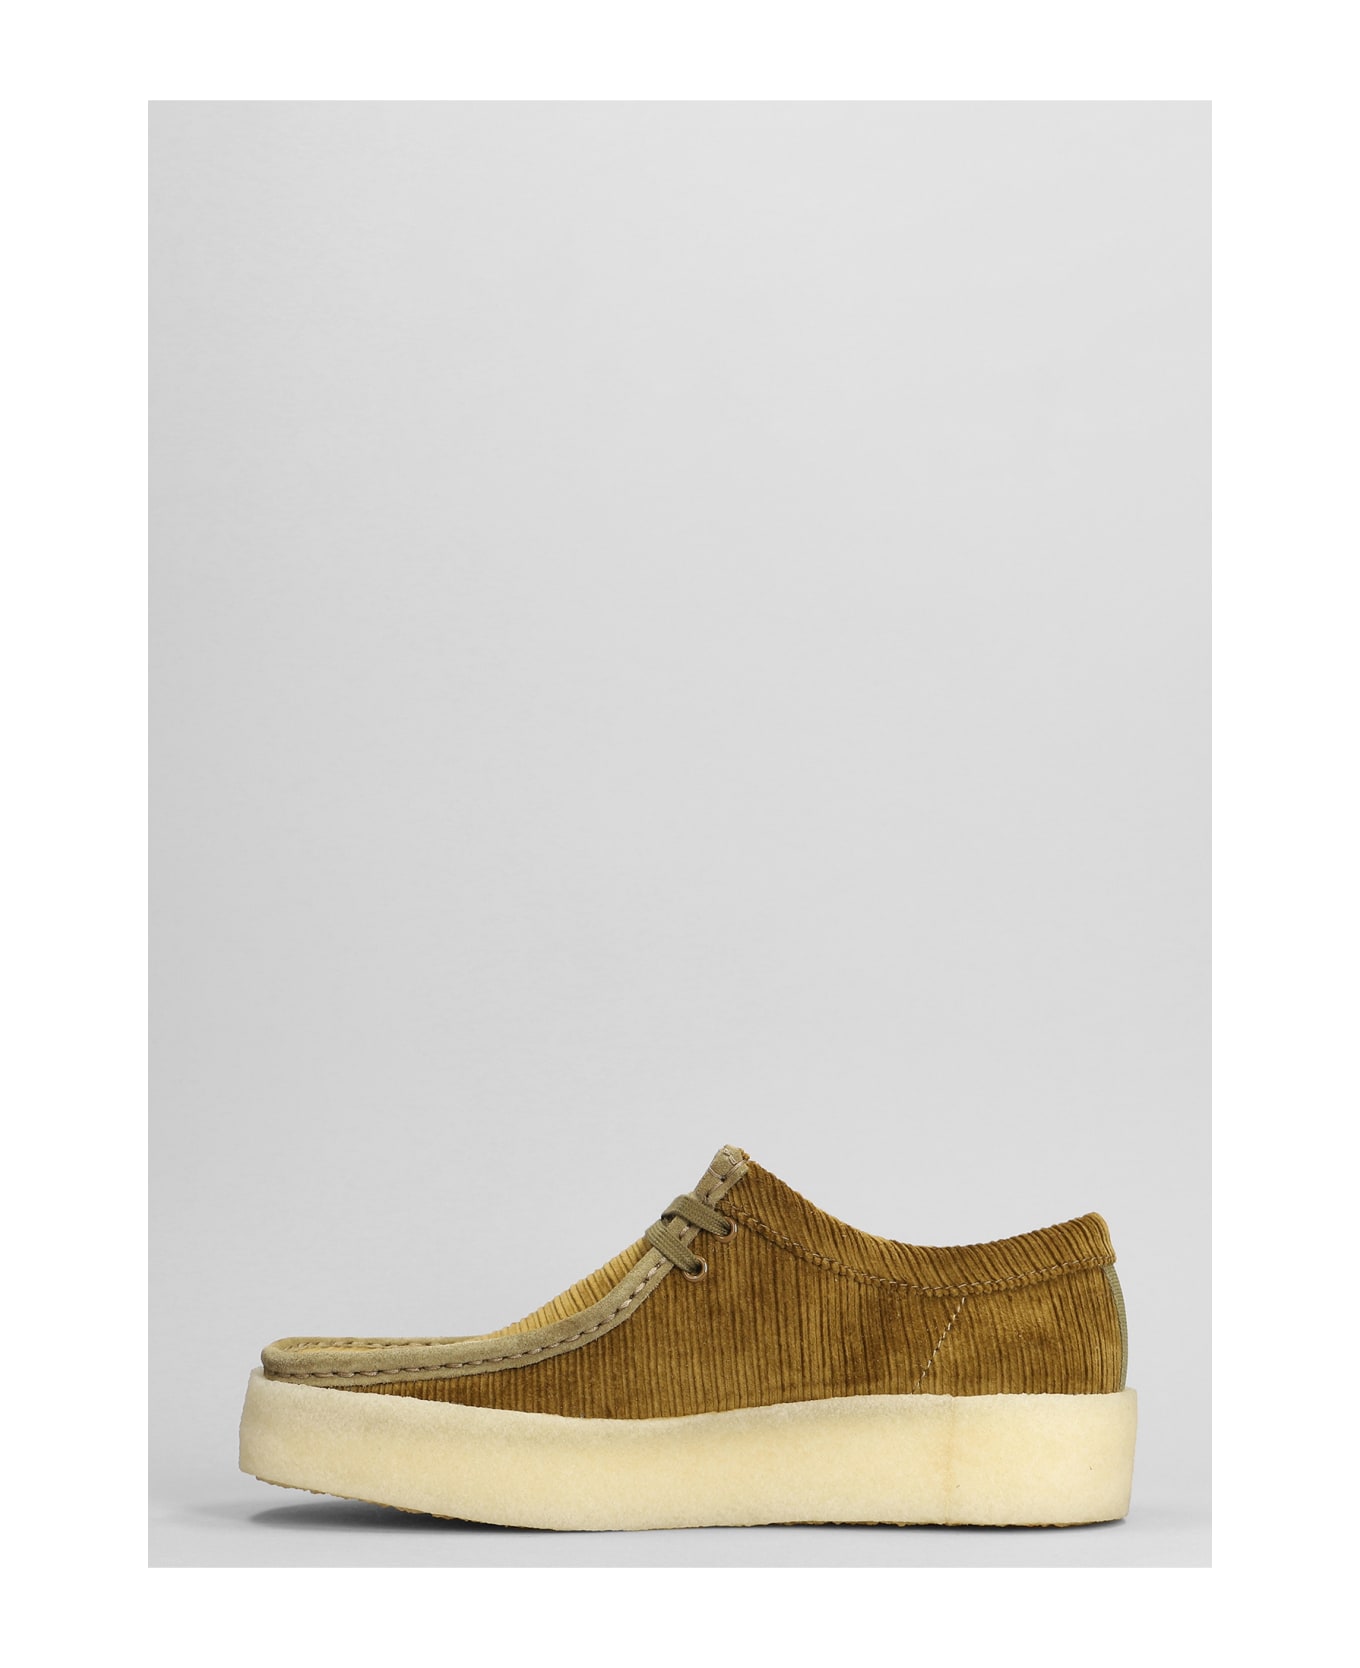 Clarks Wallabee Cup Lace Up Shoes In Leather Color Velvet - leather color